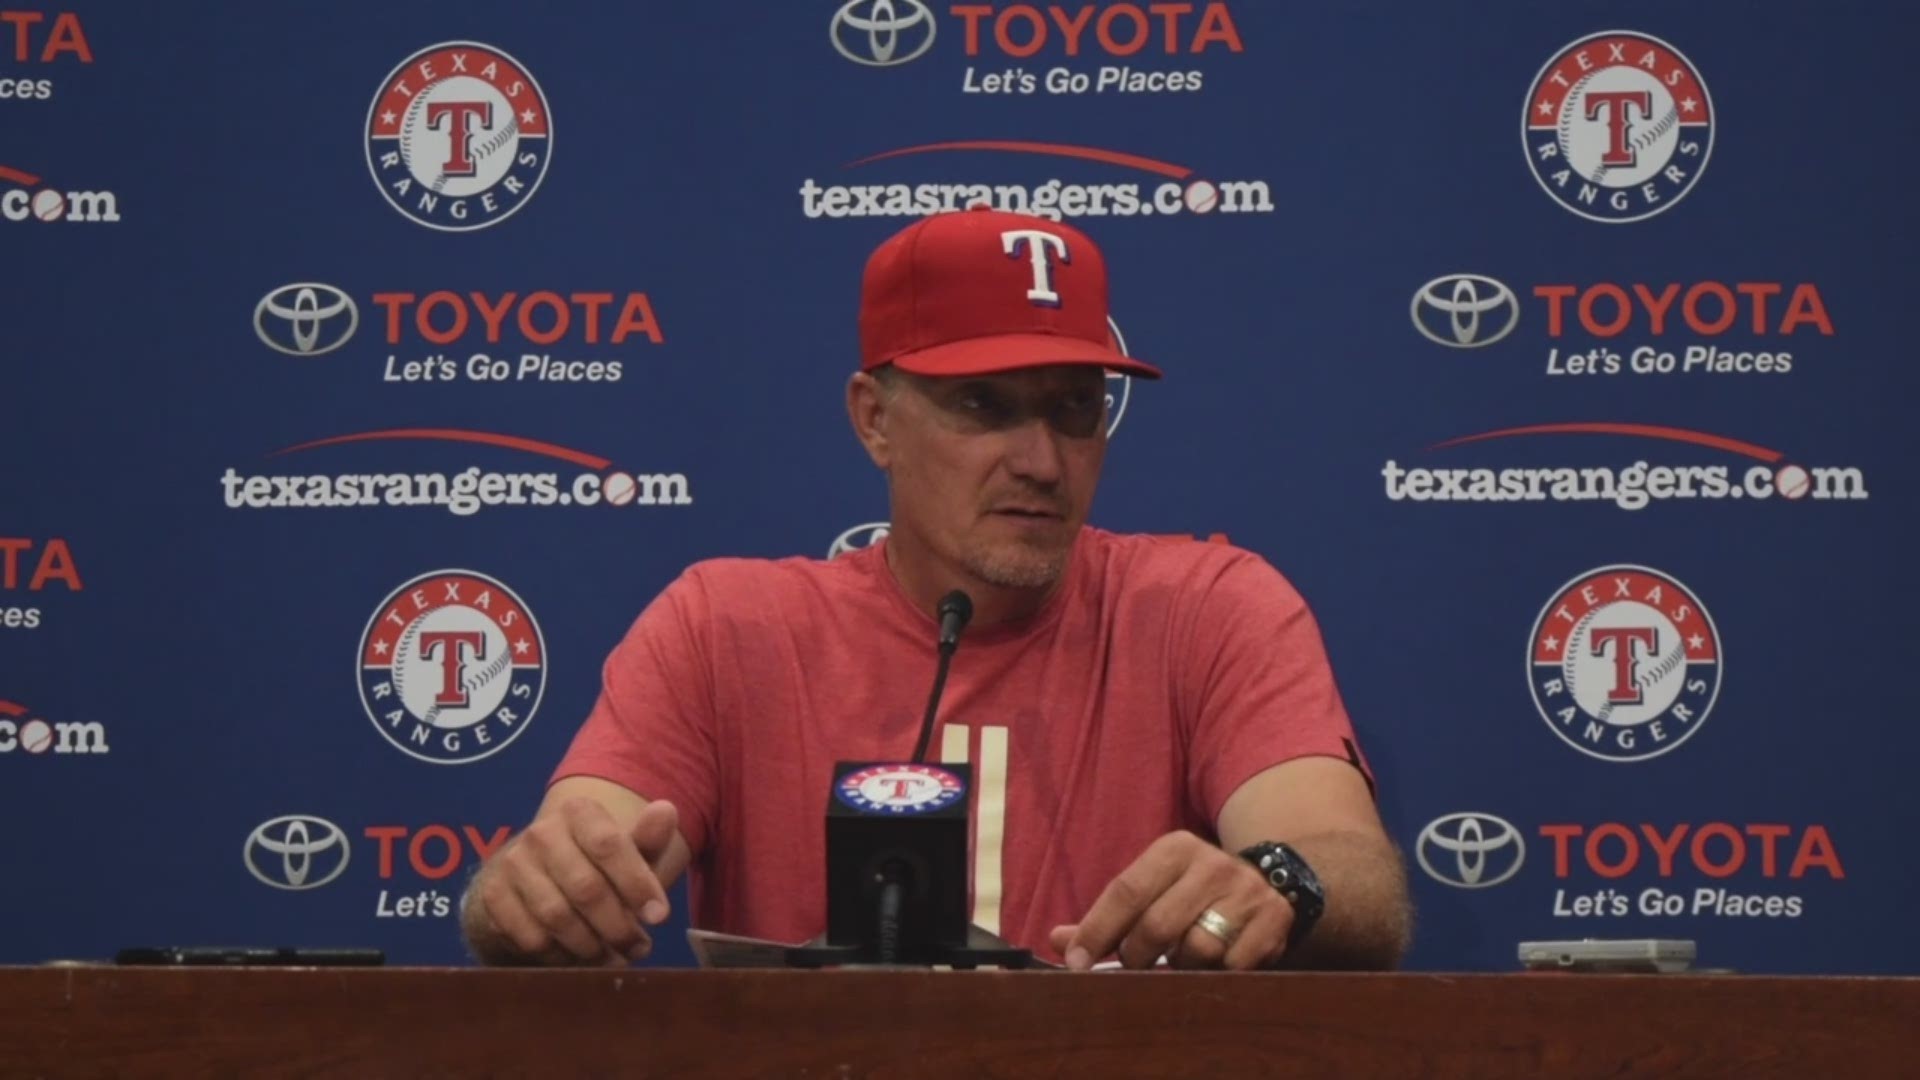 Jeff Banister, Nomar Mazara and Tyson Ross discuss the Rangers' 9-7 win over the White Sox, and BONUS: Jake Diekman talks about his first rehab outing as he returns from colon surgery.